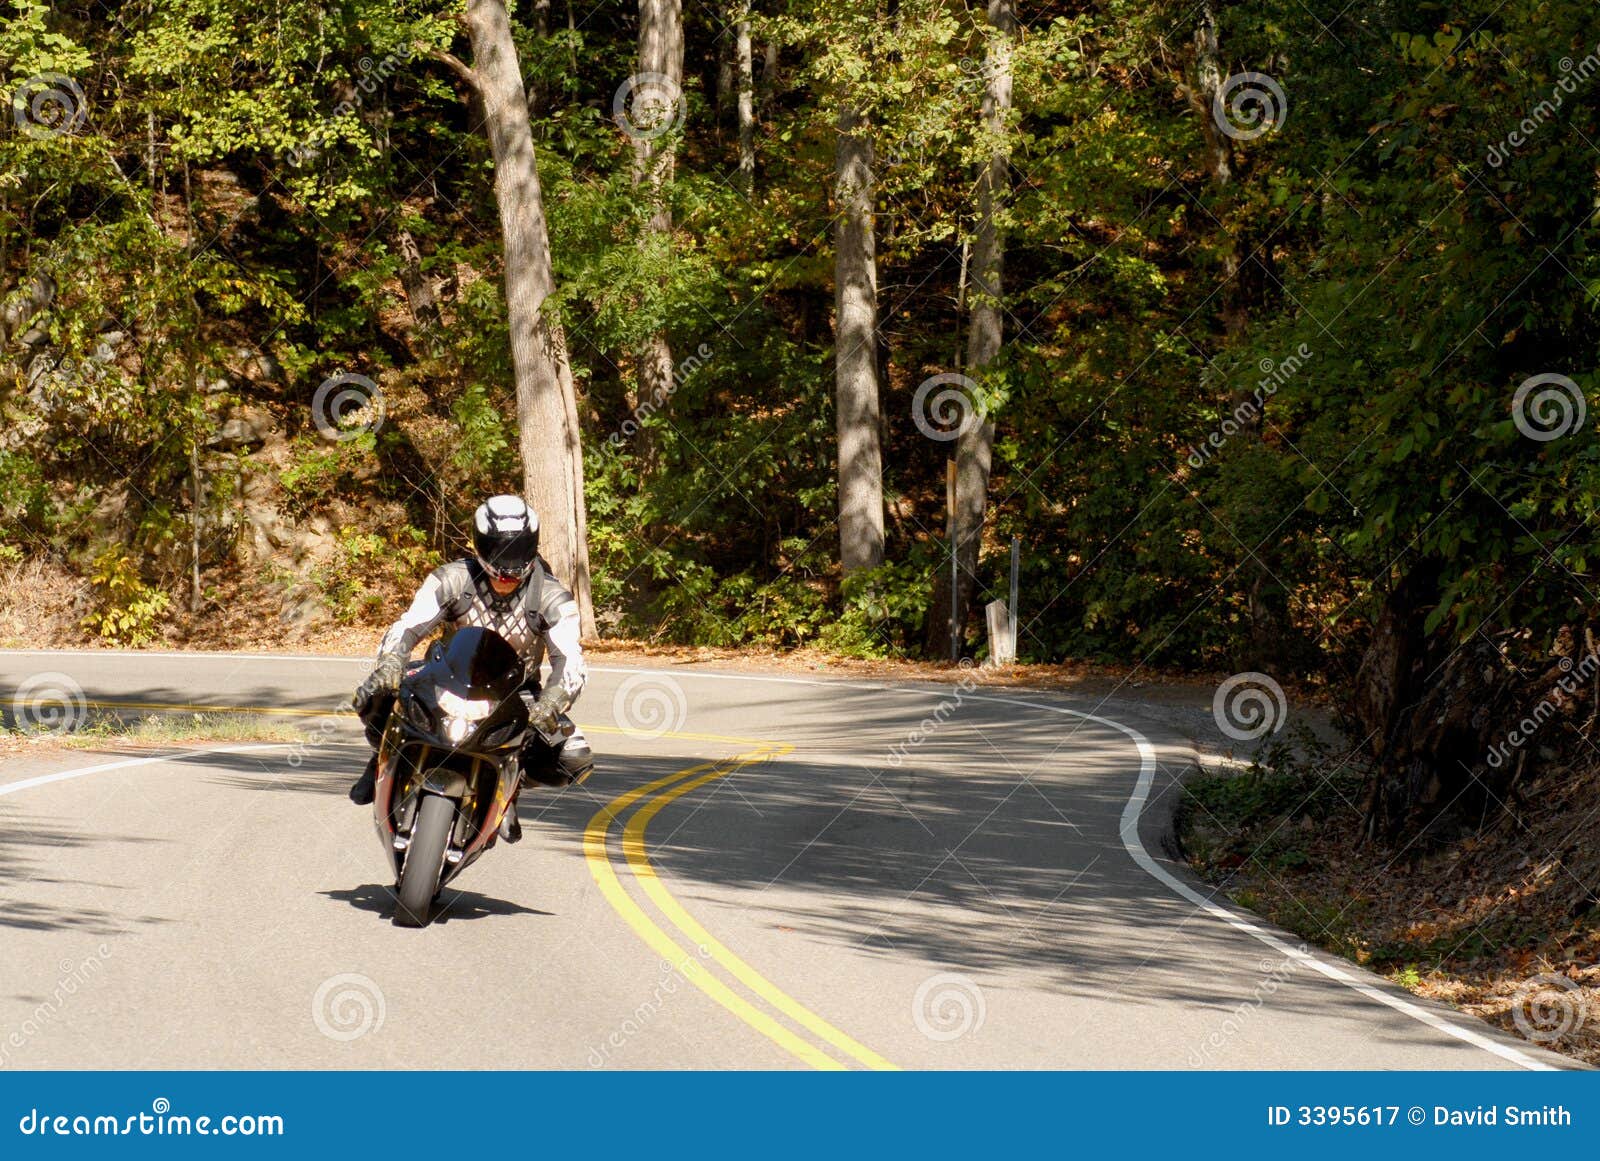 motorcyclist on a winding road